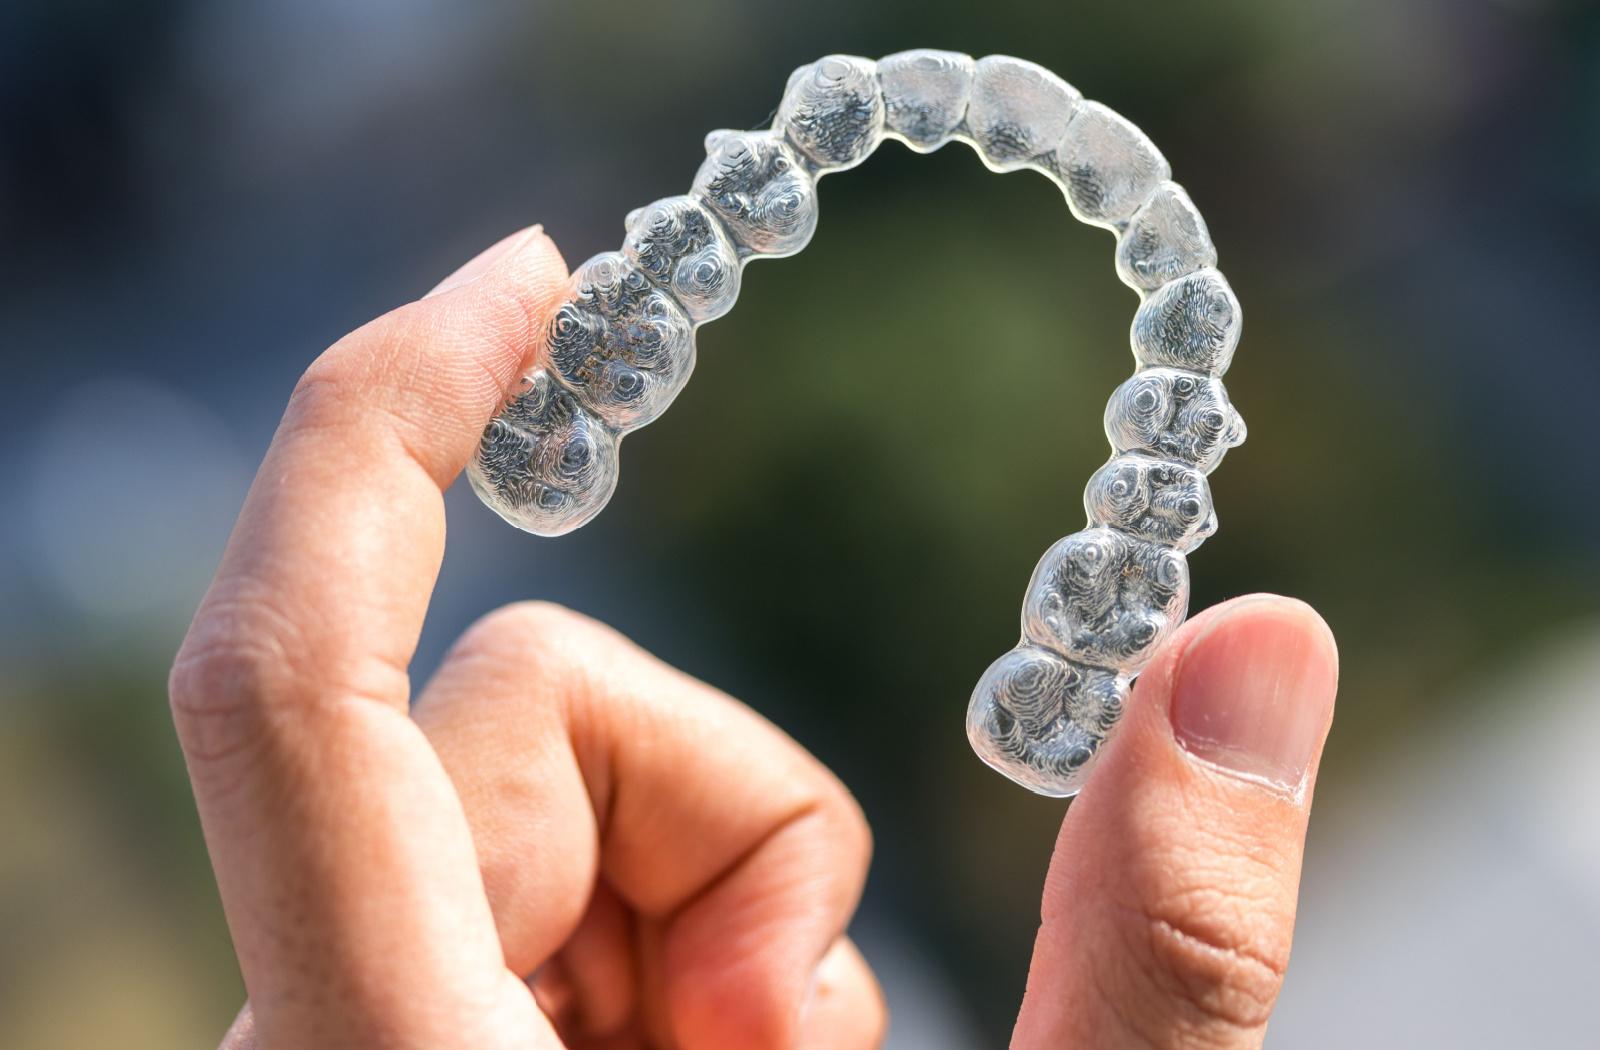 A close-up of an Invisalign being held up by two fingers.